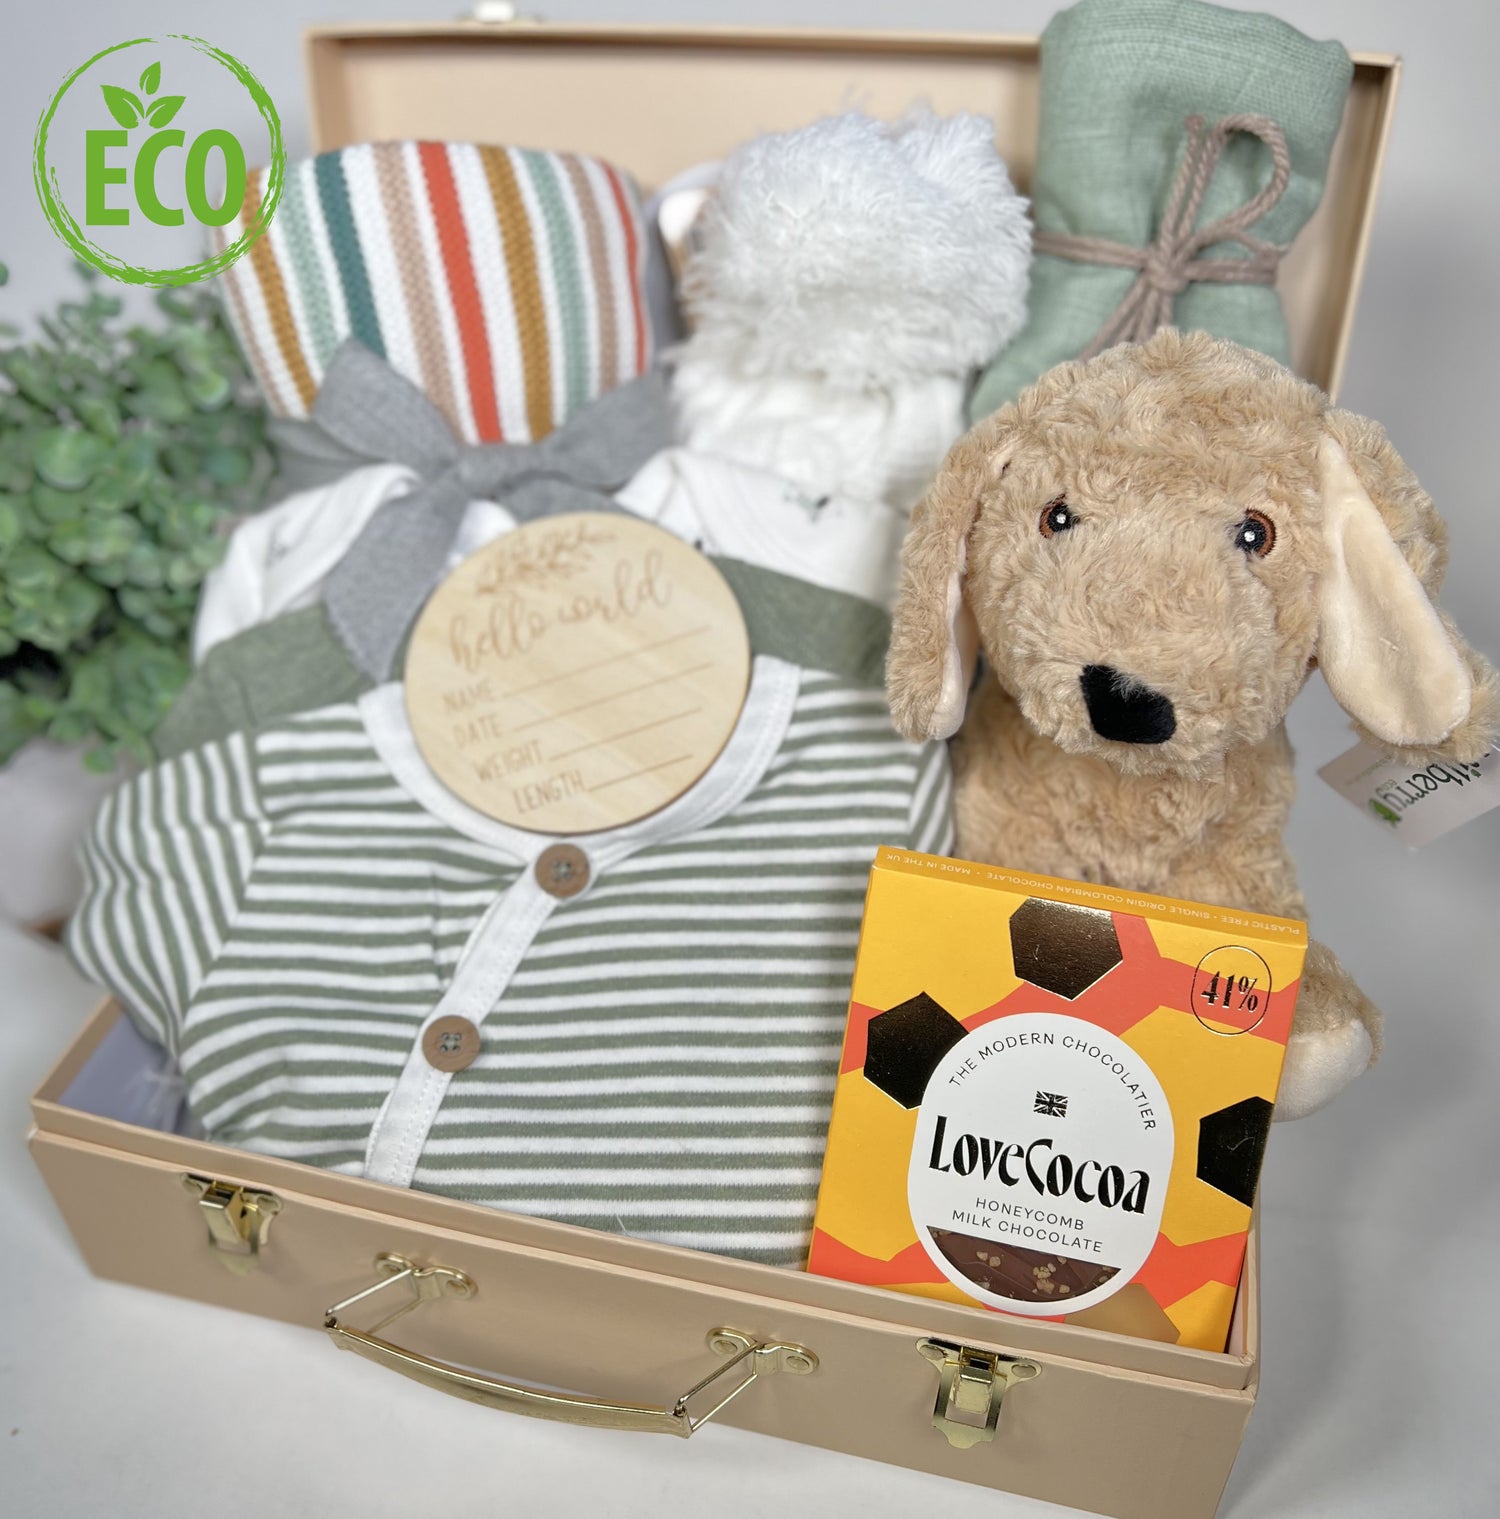 Unisex baby gift haper full of eco friendly new baby essentials including a 3 piece organic set of baby body vests in green abd white, a green muslin square, a cotton striped baby blanket, a baby pompom hat, a bat of LOve Cocoa chocolate and a cockapoo soft toy made from recycled plastics.